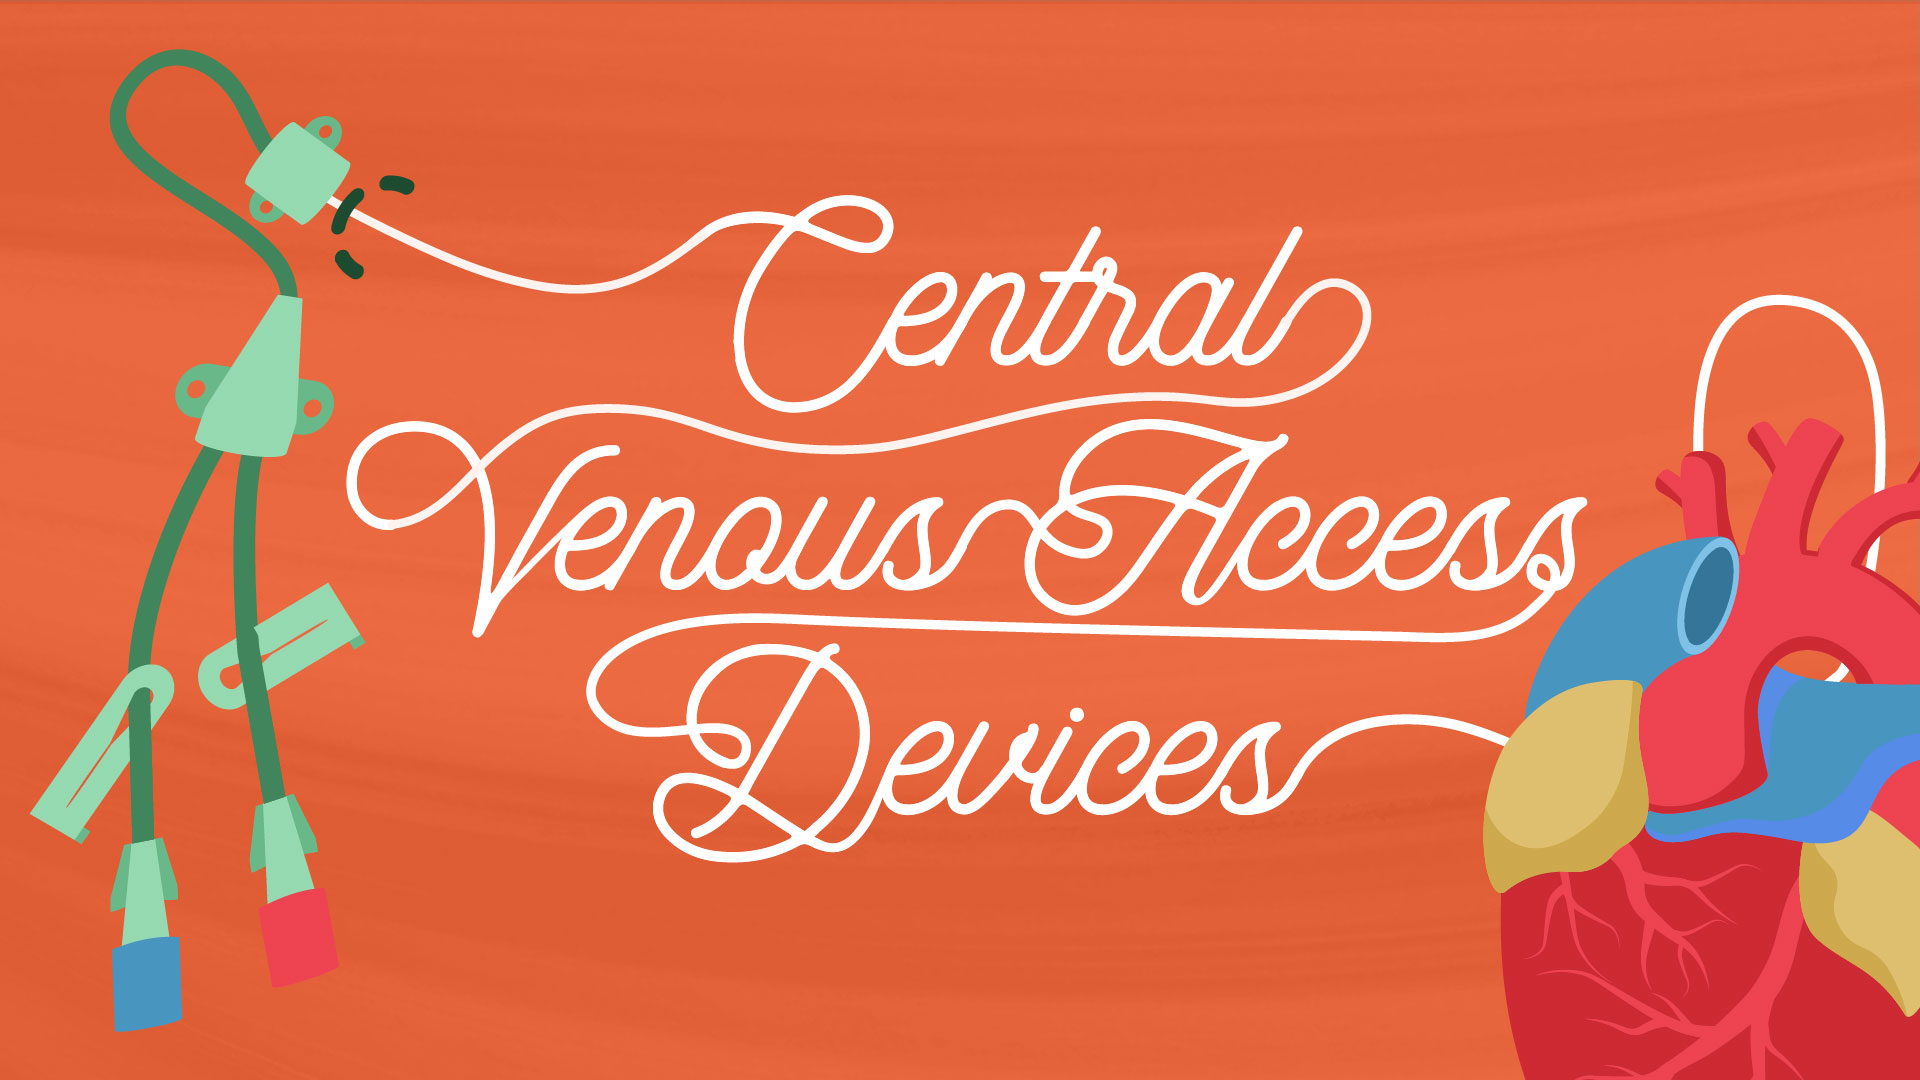 Image for Central Venous Access Devices (CVADs)